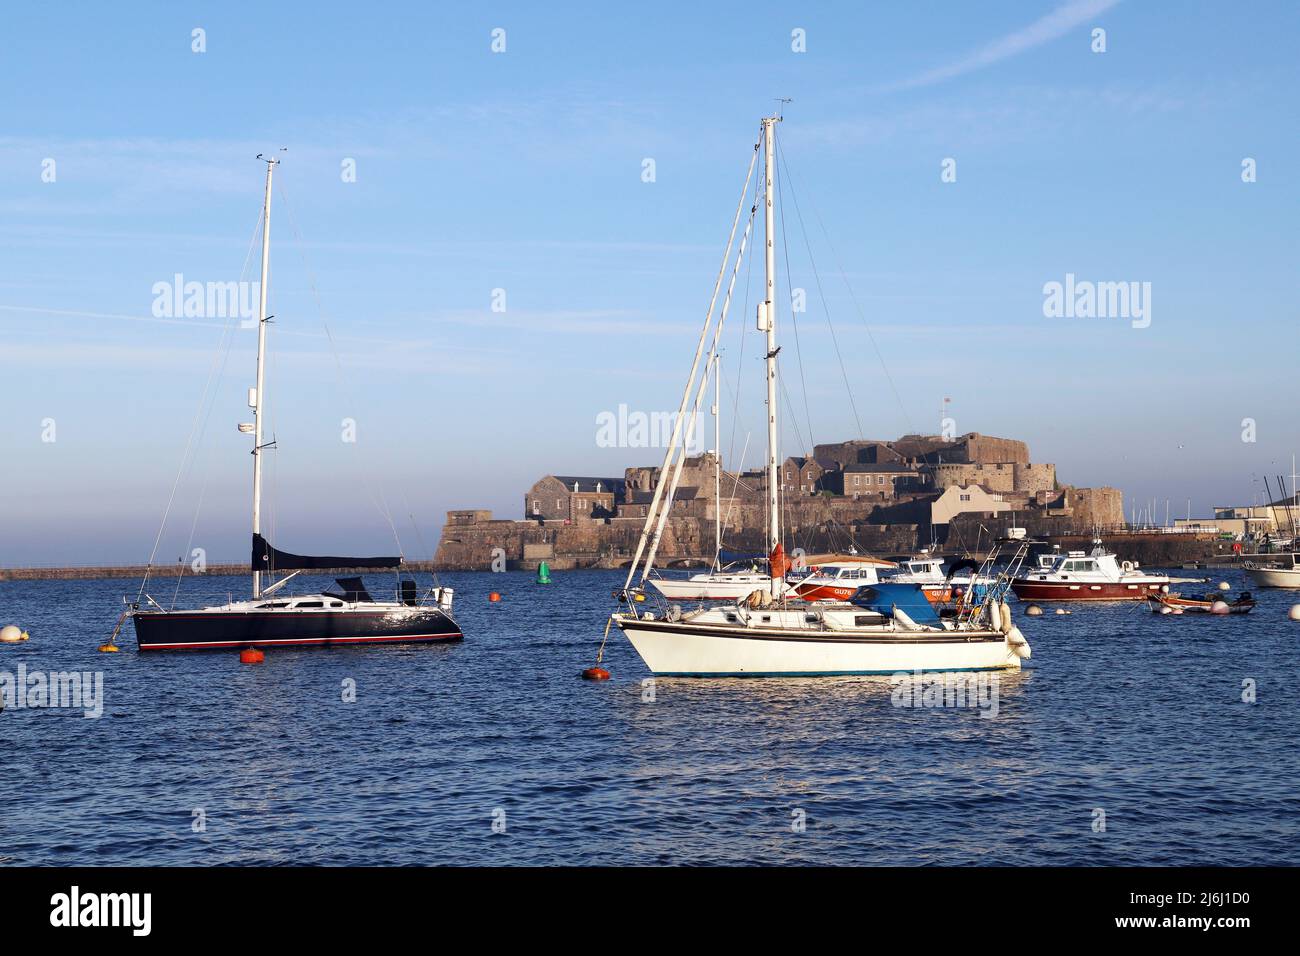 Yachts moored in St Peter Port Harbour, Guernsey, Channel Islands Stock Photo